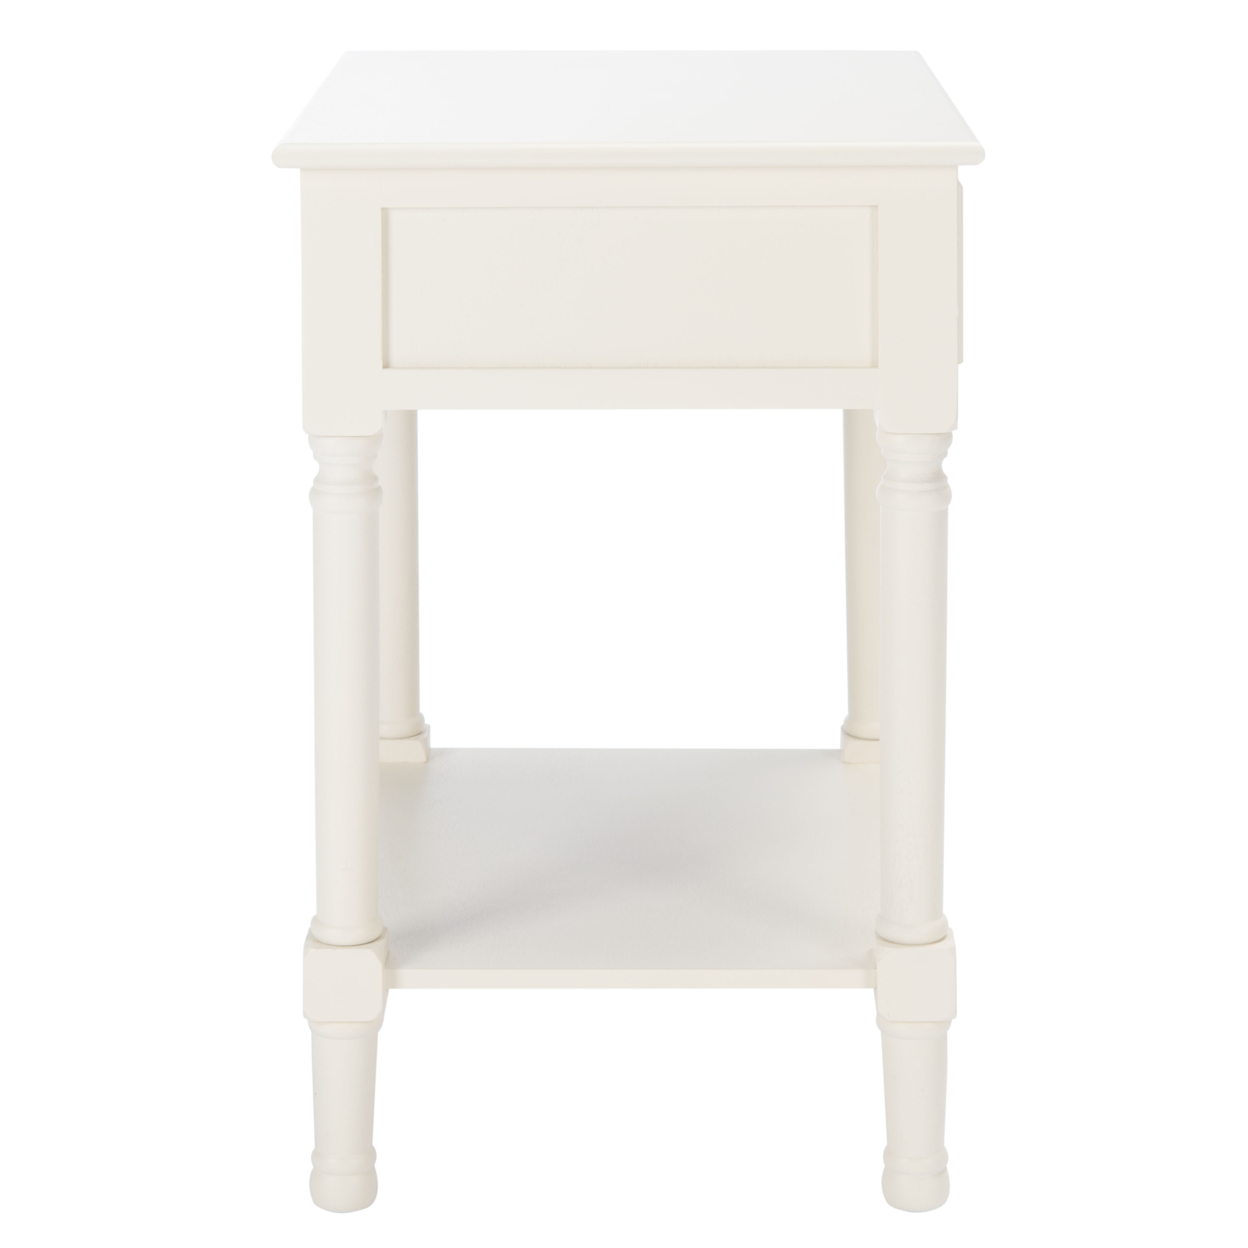 SAFAVIEH Haines 1-Drawer Accent Table White